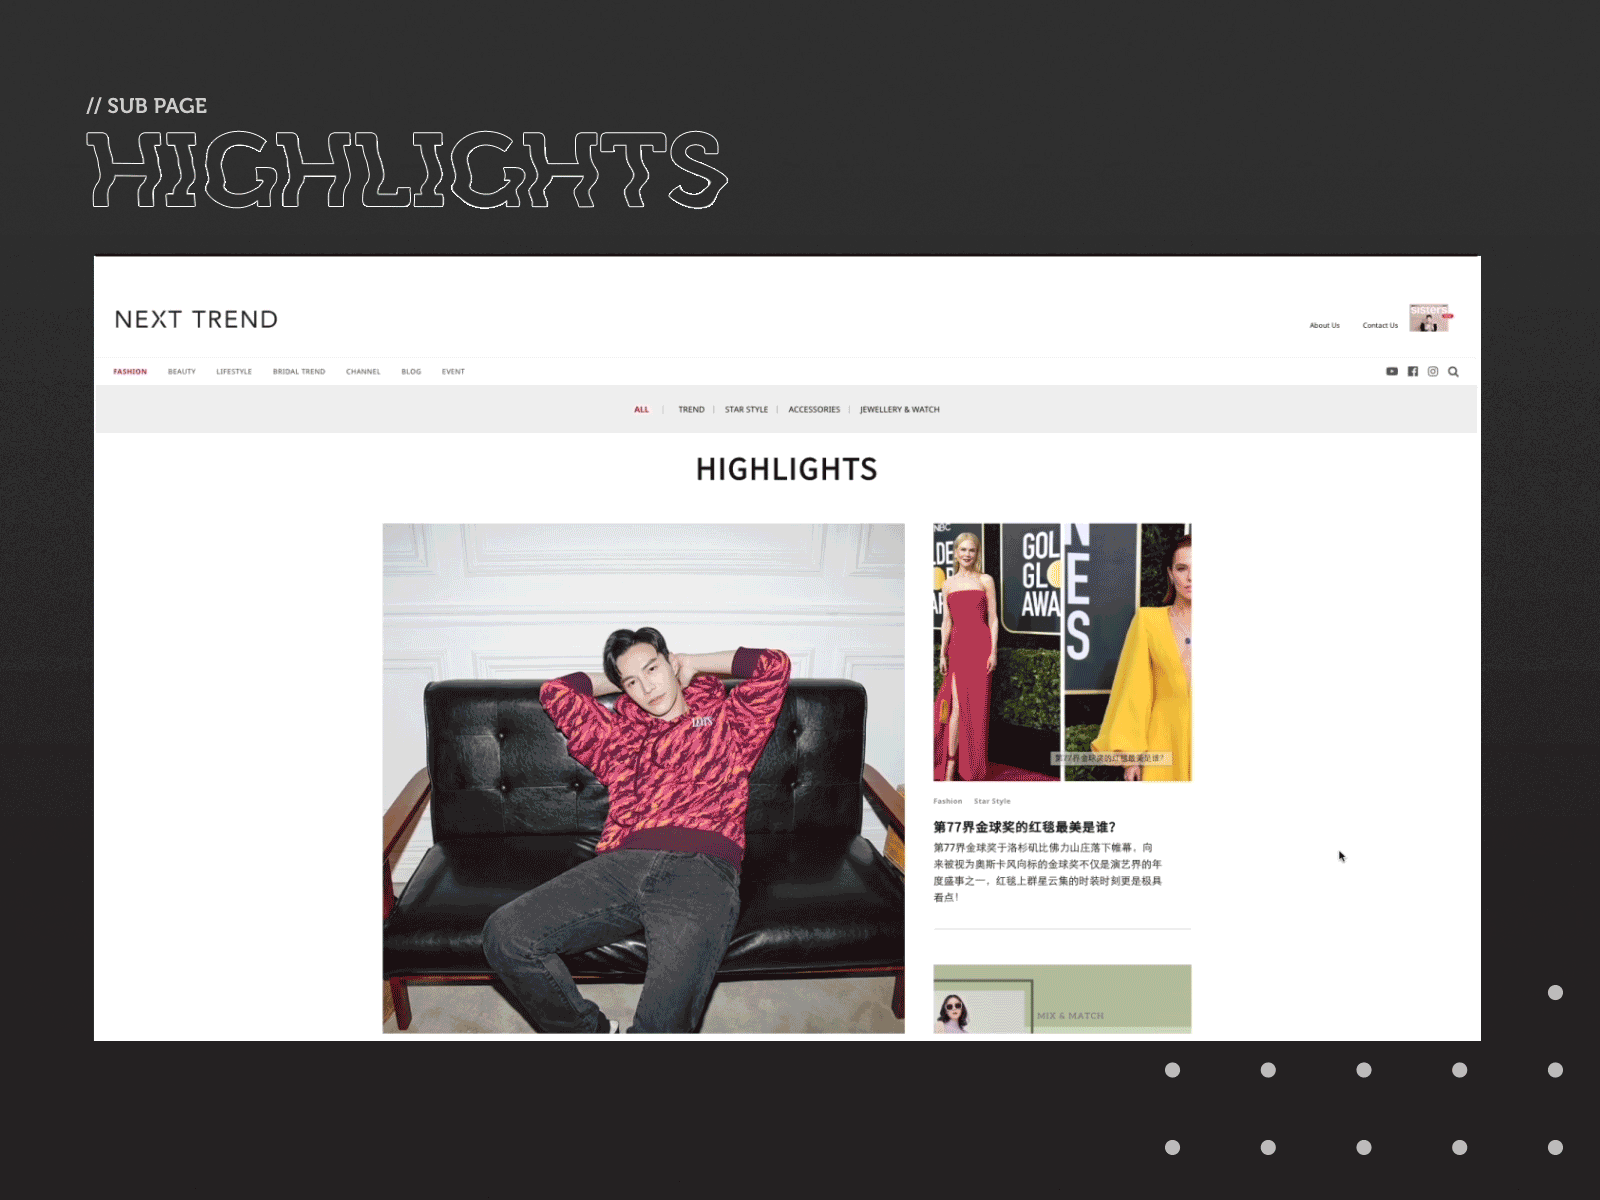 Website highlight section for Next Trend Publication with a separate side scrollable section of featured articles